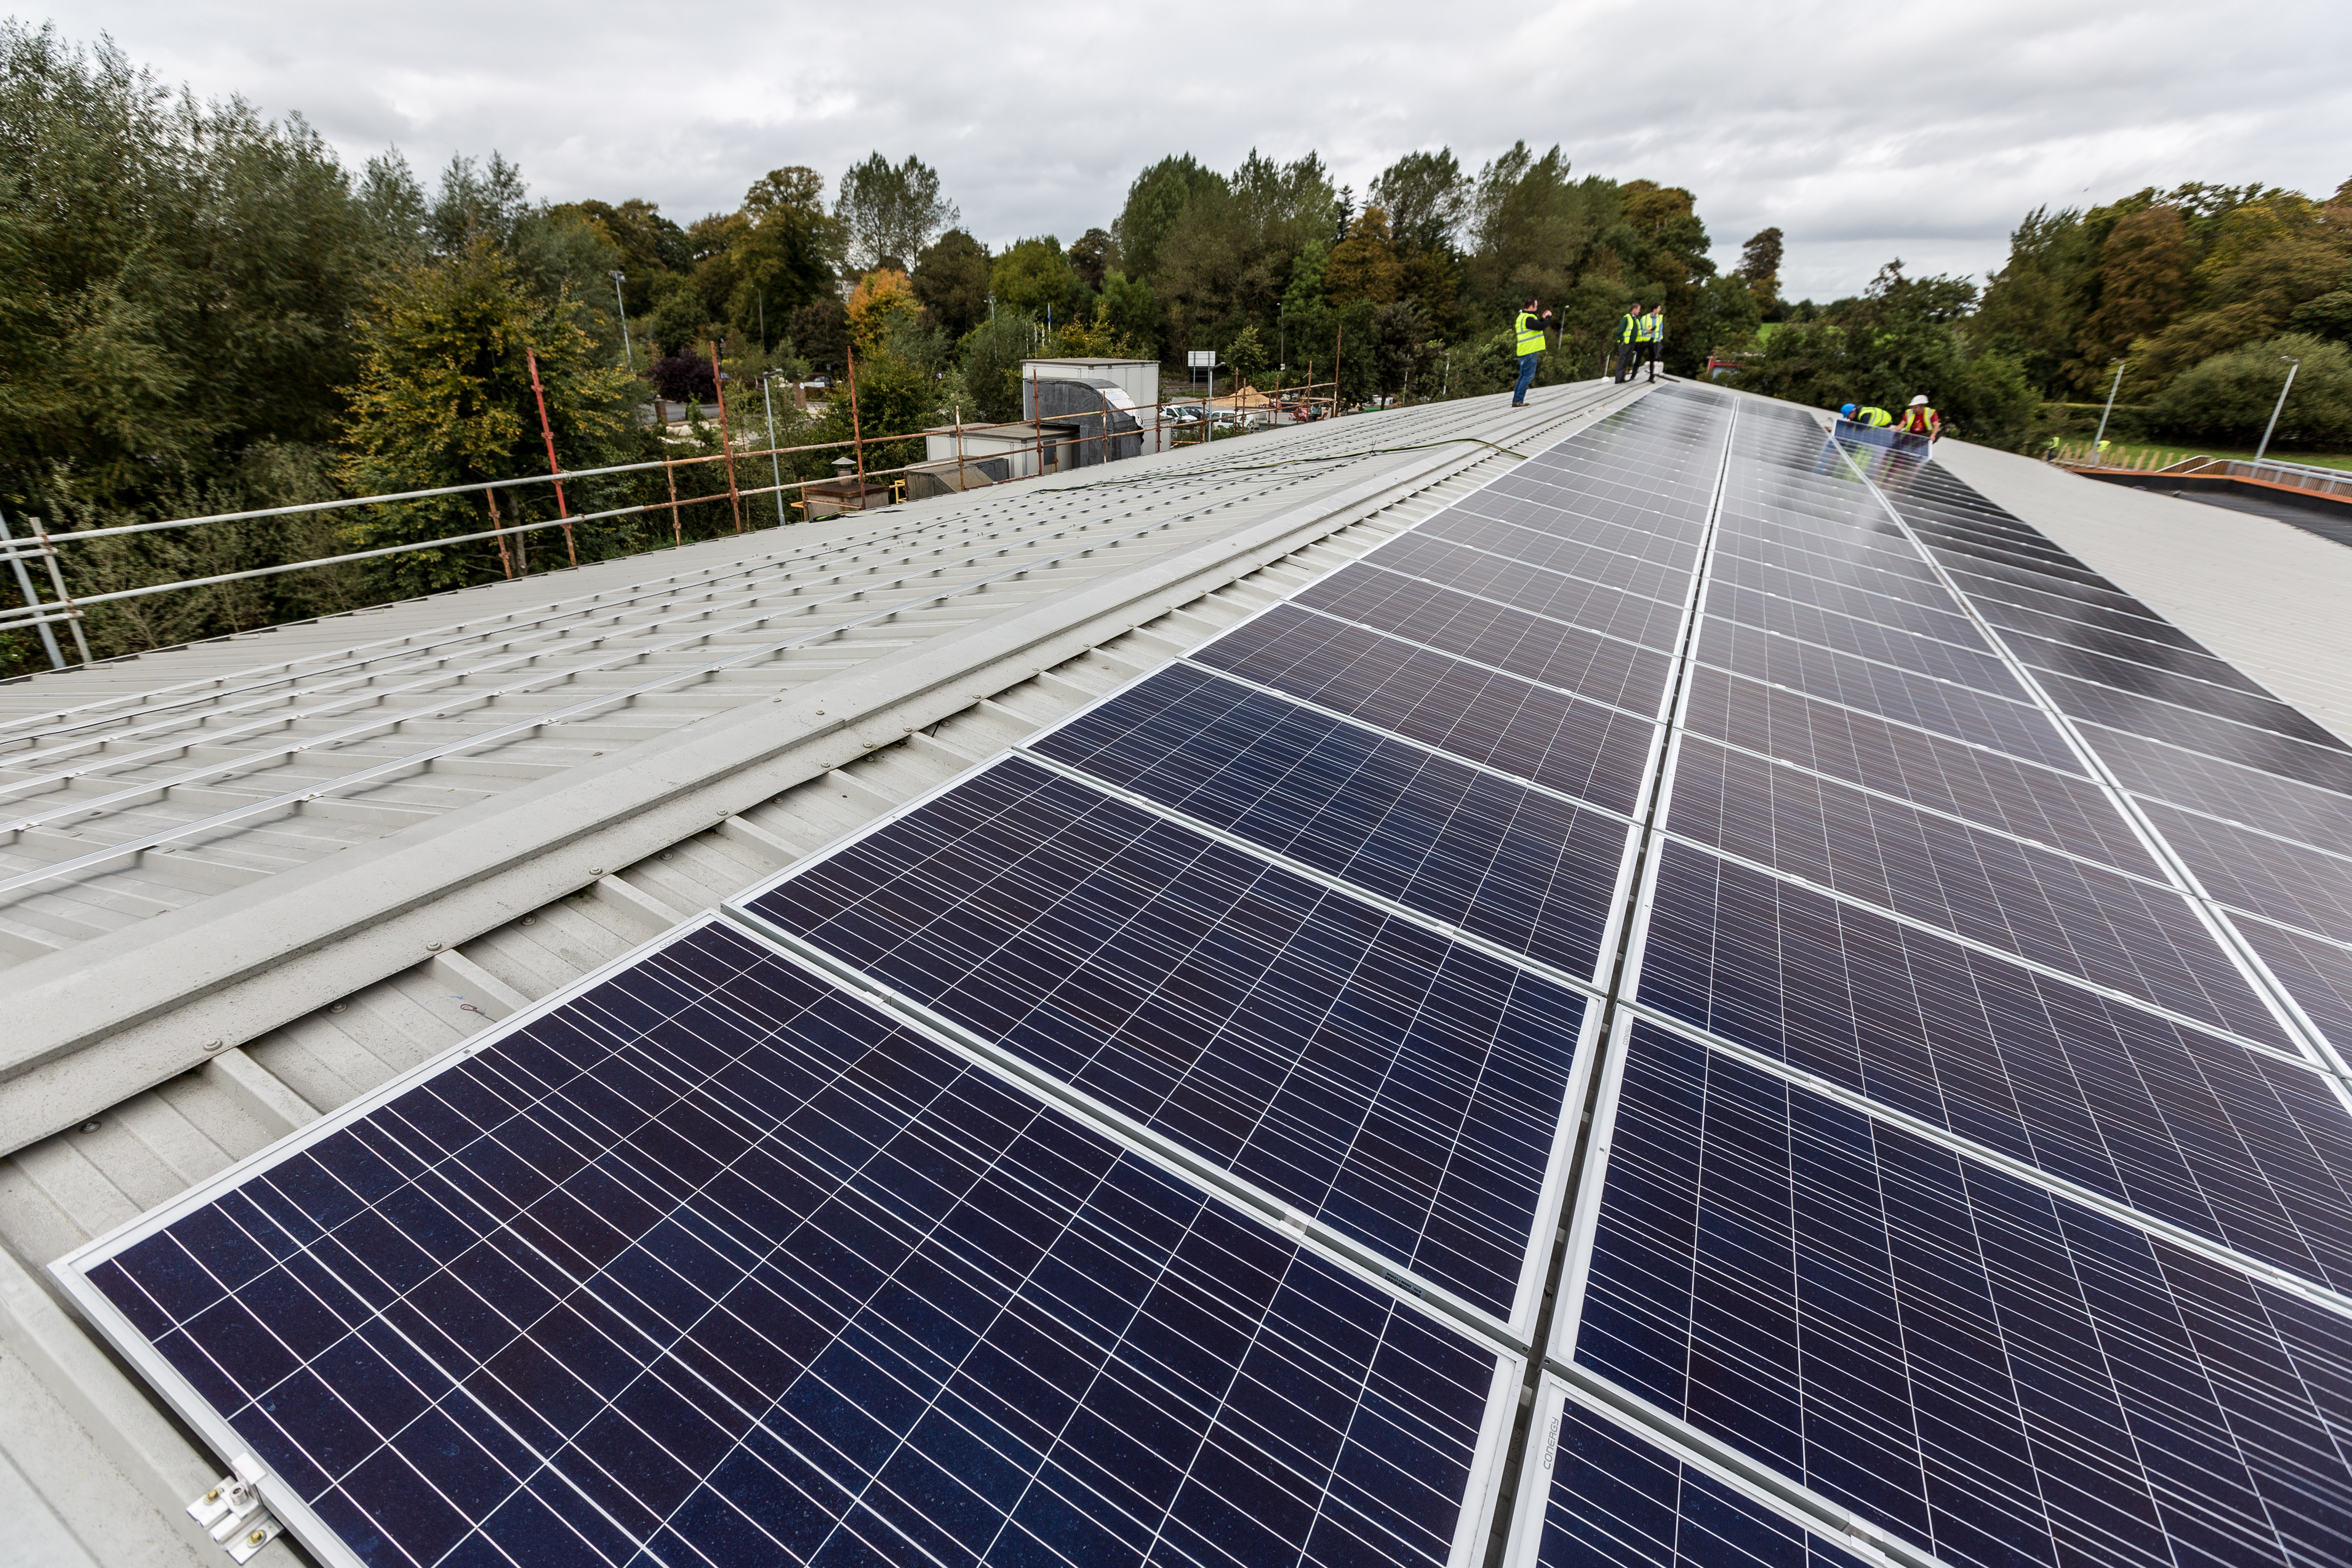 Ireland’s Largest Photovoltaic Solar Panel Project is Completed | Tea